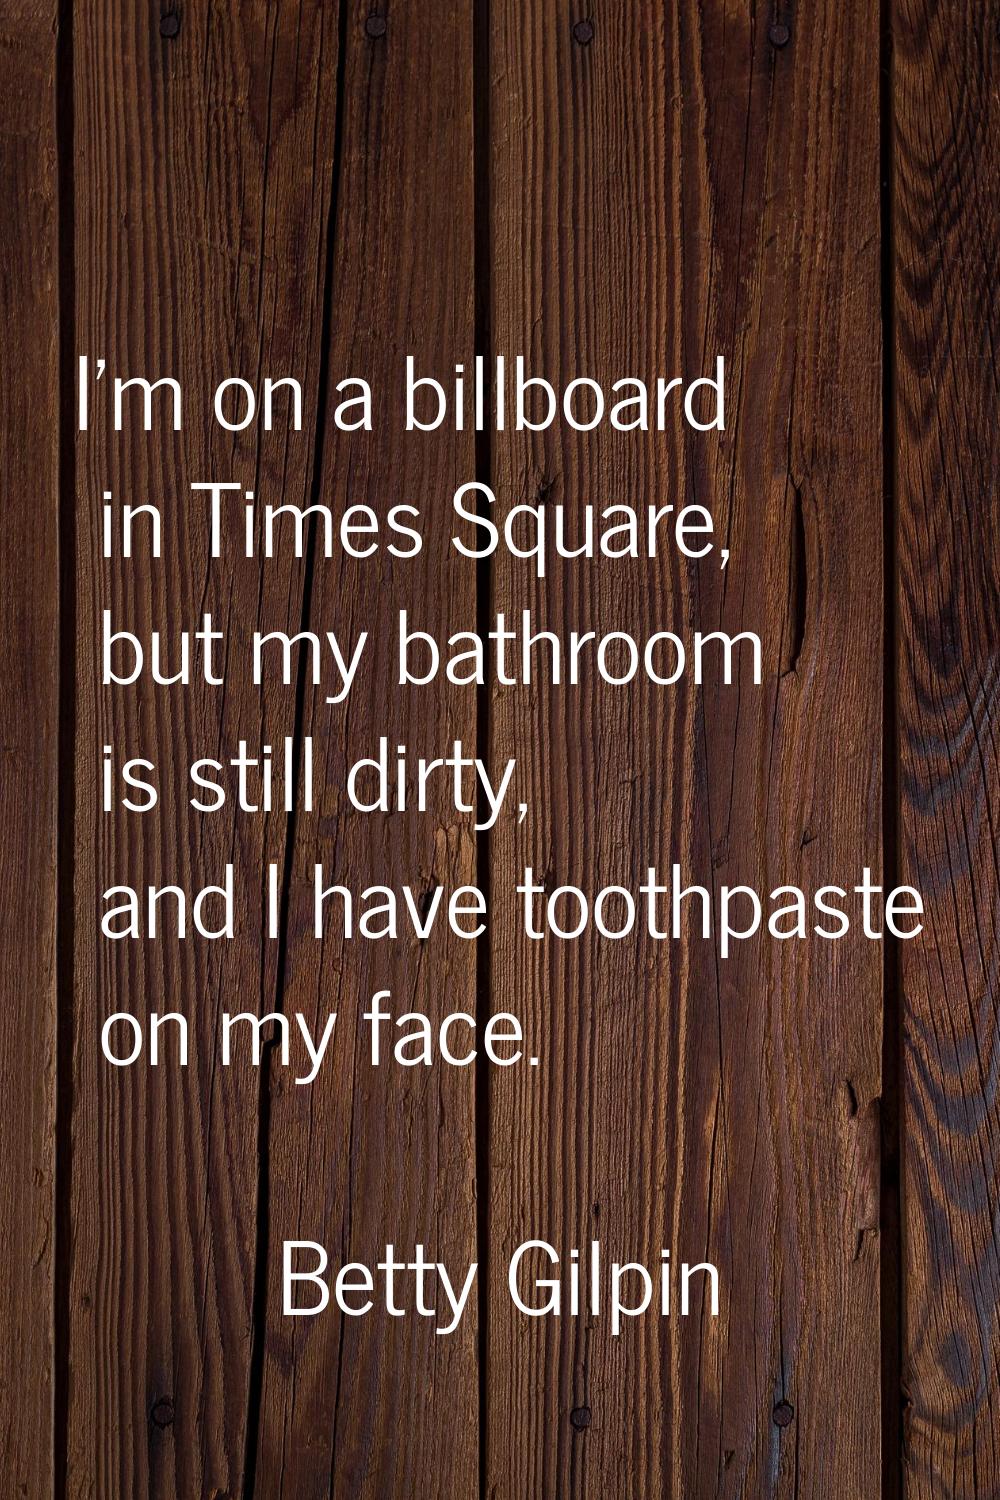 I'm on a billboard in Times Square, but my bathroom is still dirty, and I have toothpaste on my fac